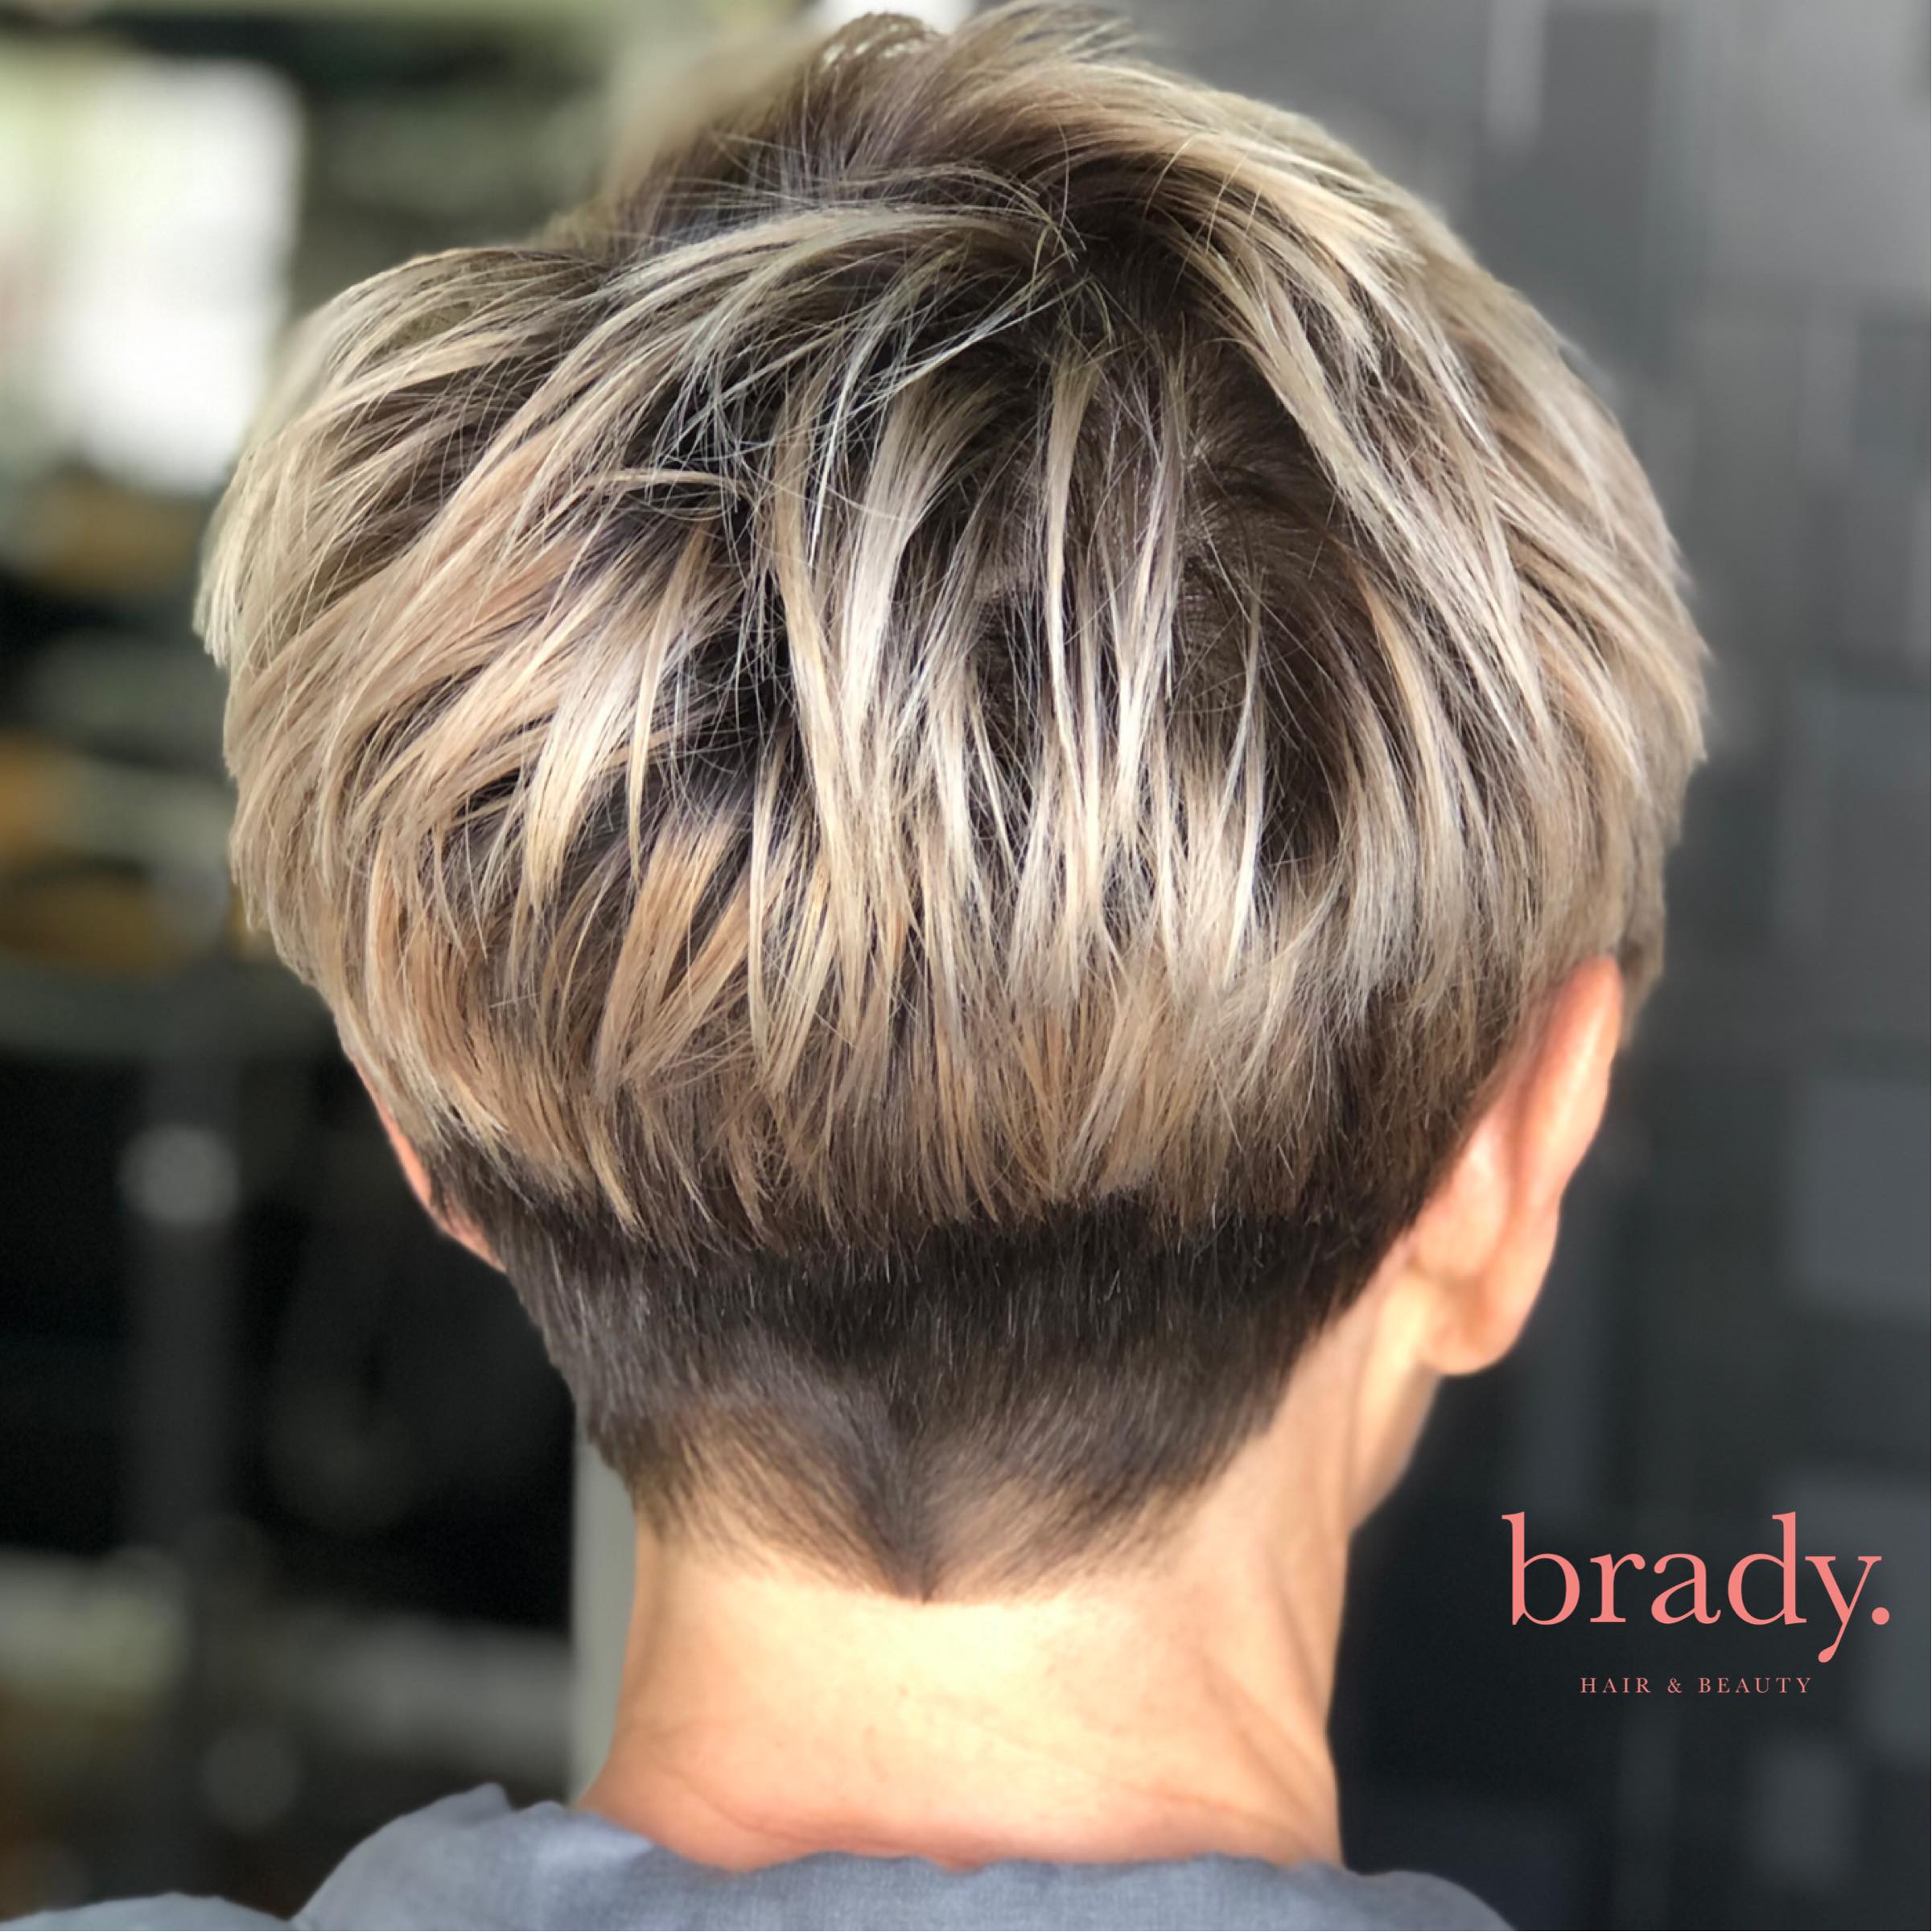  Photo of woman with short pixie style haircut, styled by Brady. Hair &amp; Beauty, Toowong, Brisbane. 